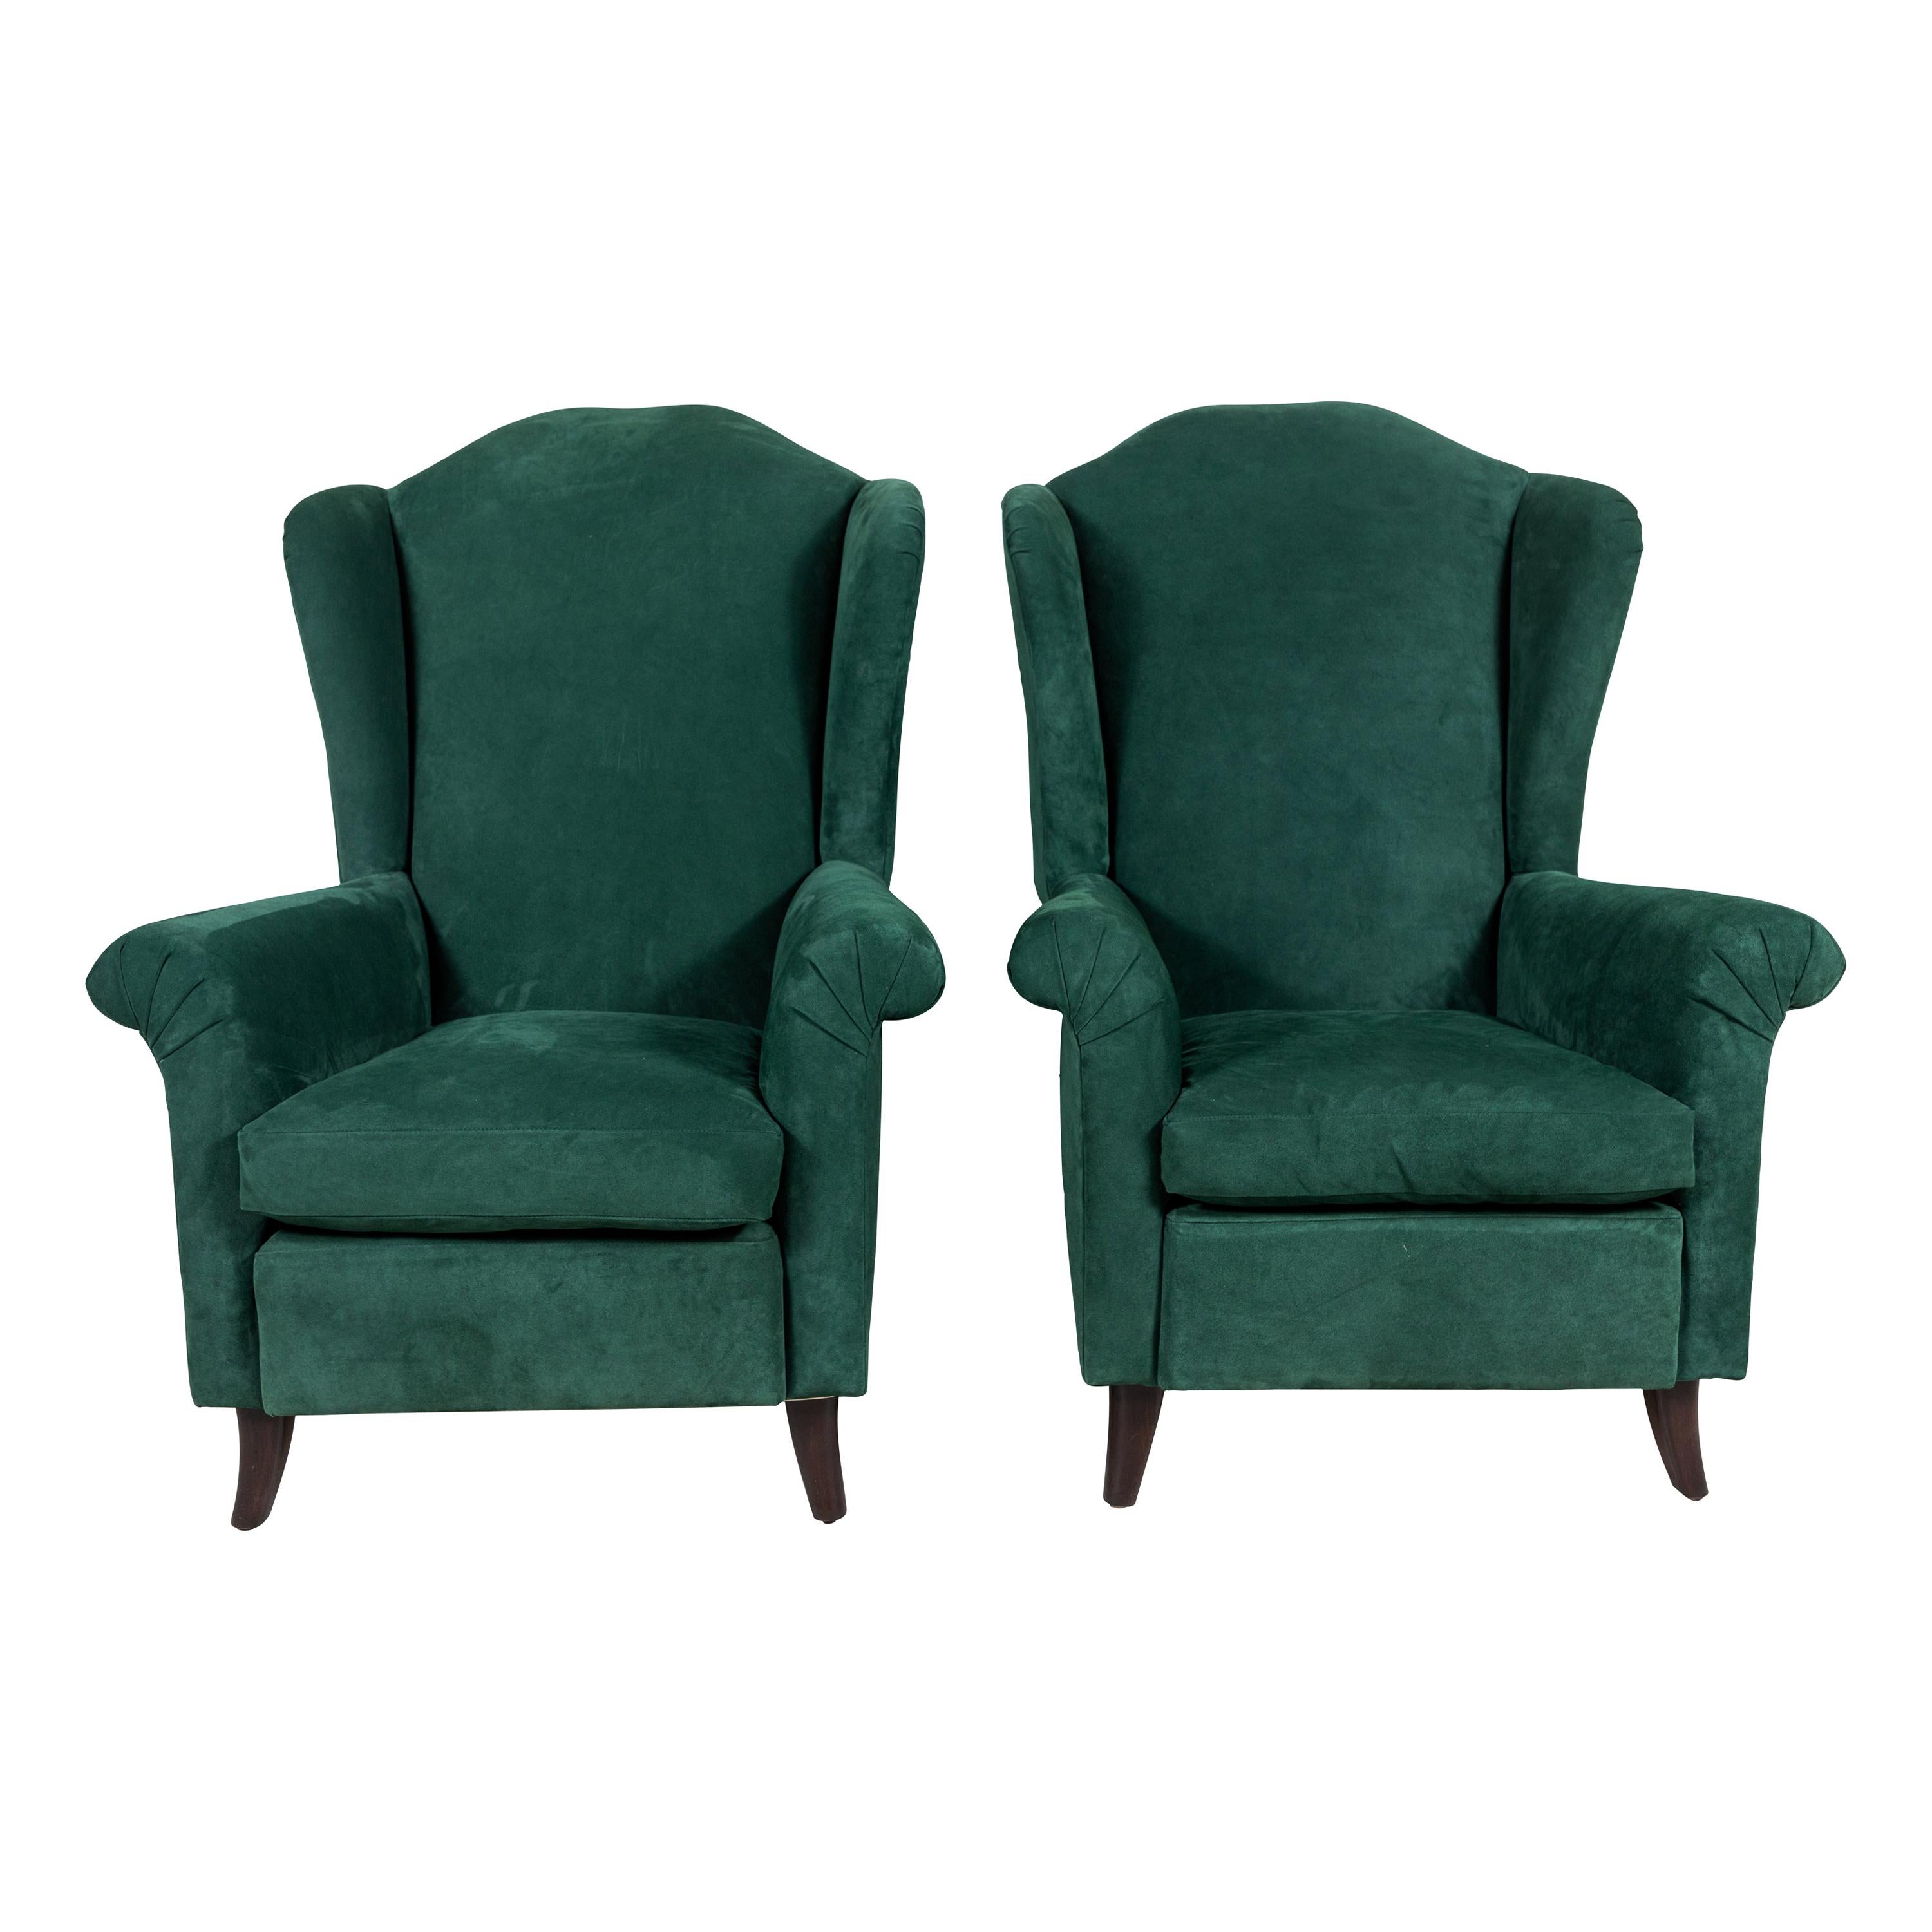 Nickey Kehoe Wingback Chair Upholstered in Green Suede